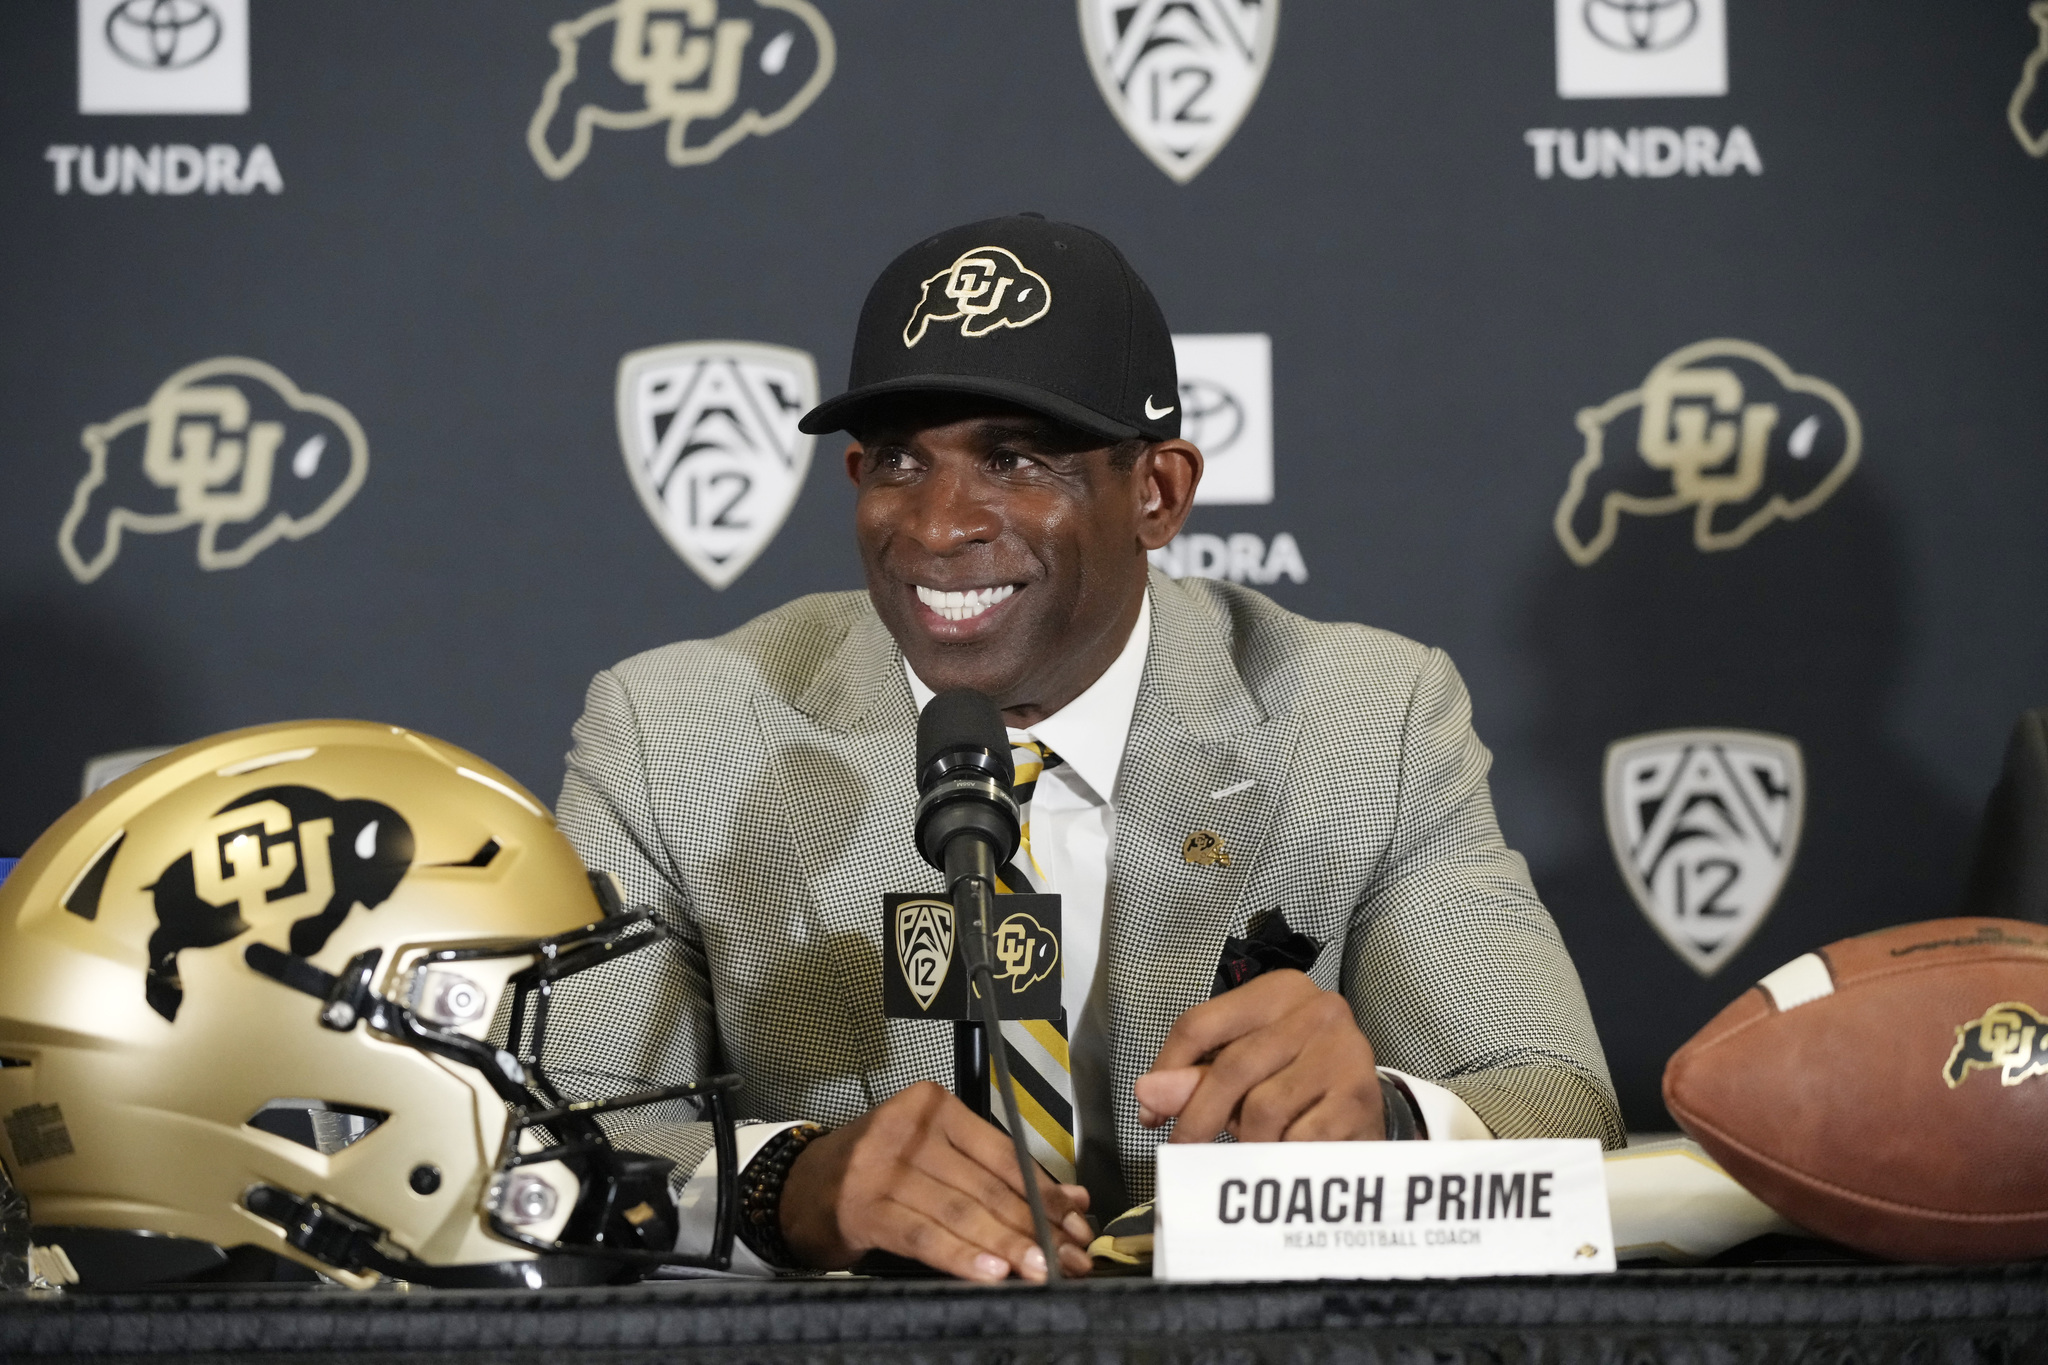 FILE - lt;HIT gt;Deion lt;/HIT gt; Sanders speaks after being introduced as the new head football coach at the University of Colorado during a news conference Sunday, Dec. 4, 2022, in Boulder, Colo. Floyd Keith has waited half a century for a Black coach with lt;HIT gt;Deion lt;/HIT gt; Sanders' swagger and success to shake up college football. (AP Photo/David Zalubowski, File)